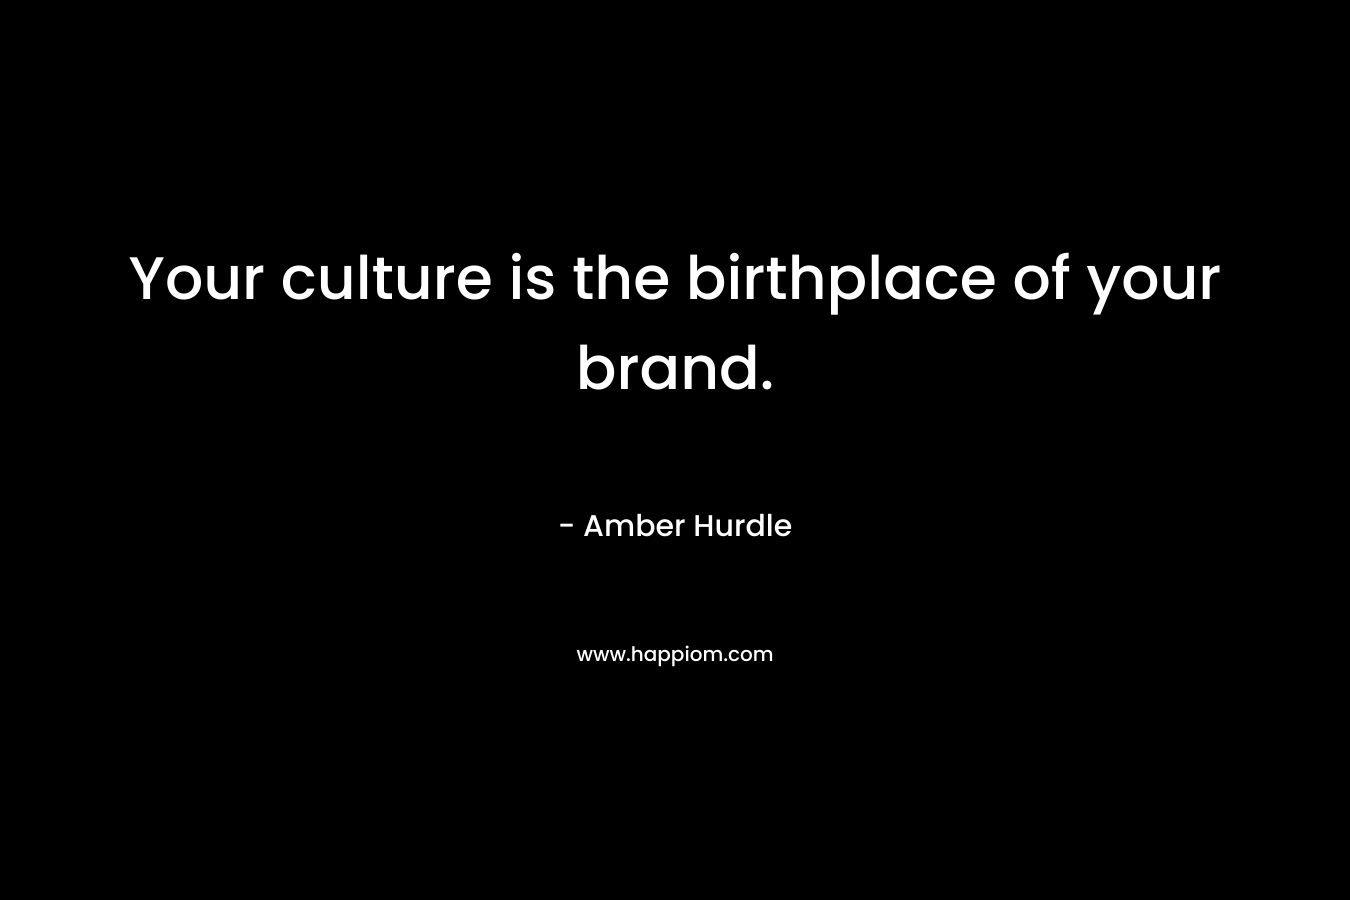 Your culture is the birthplace of your brand.